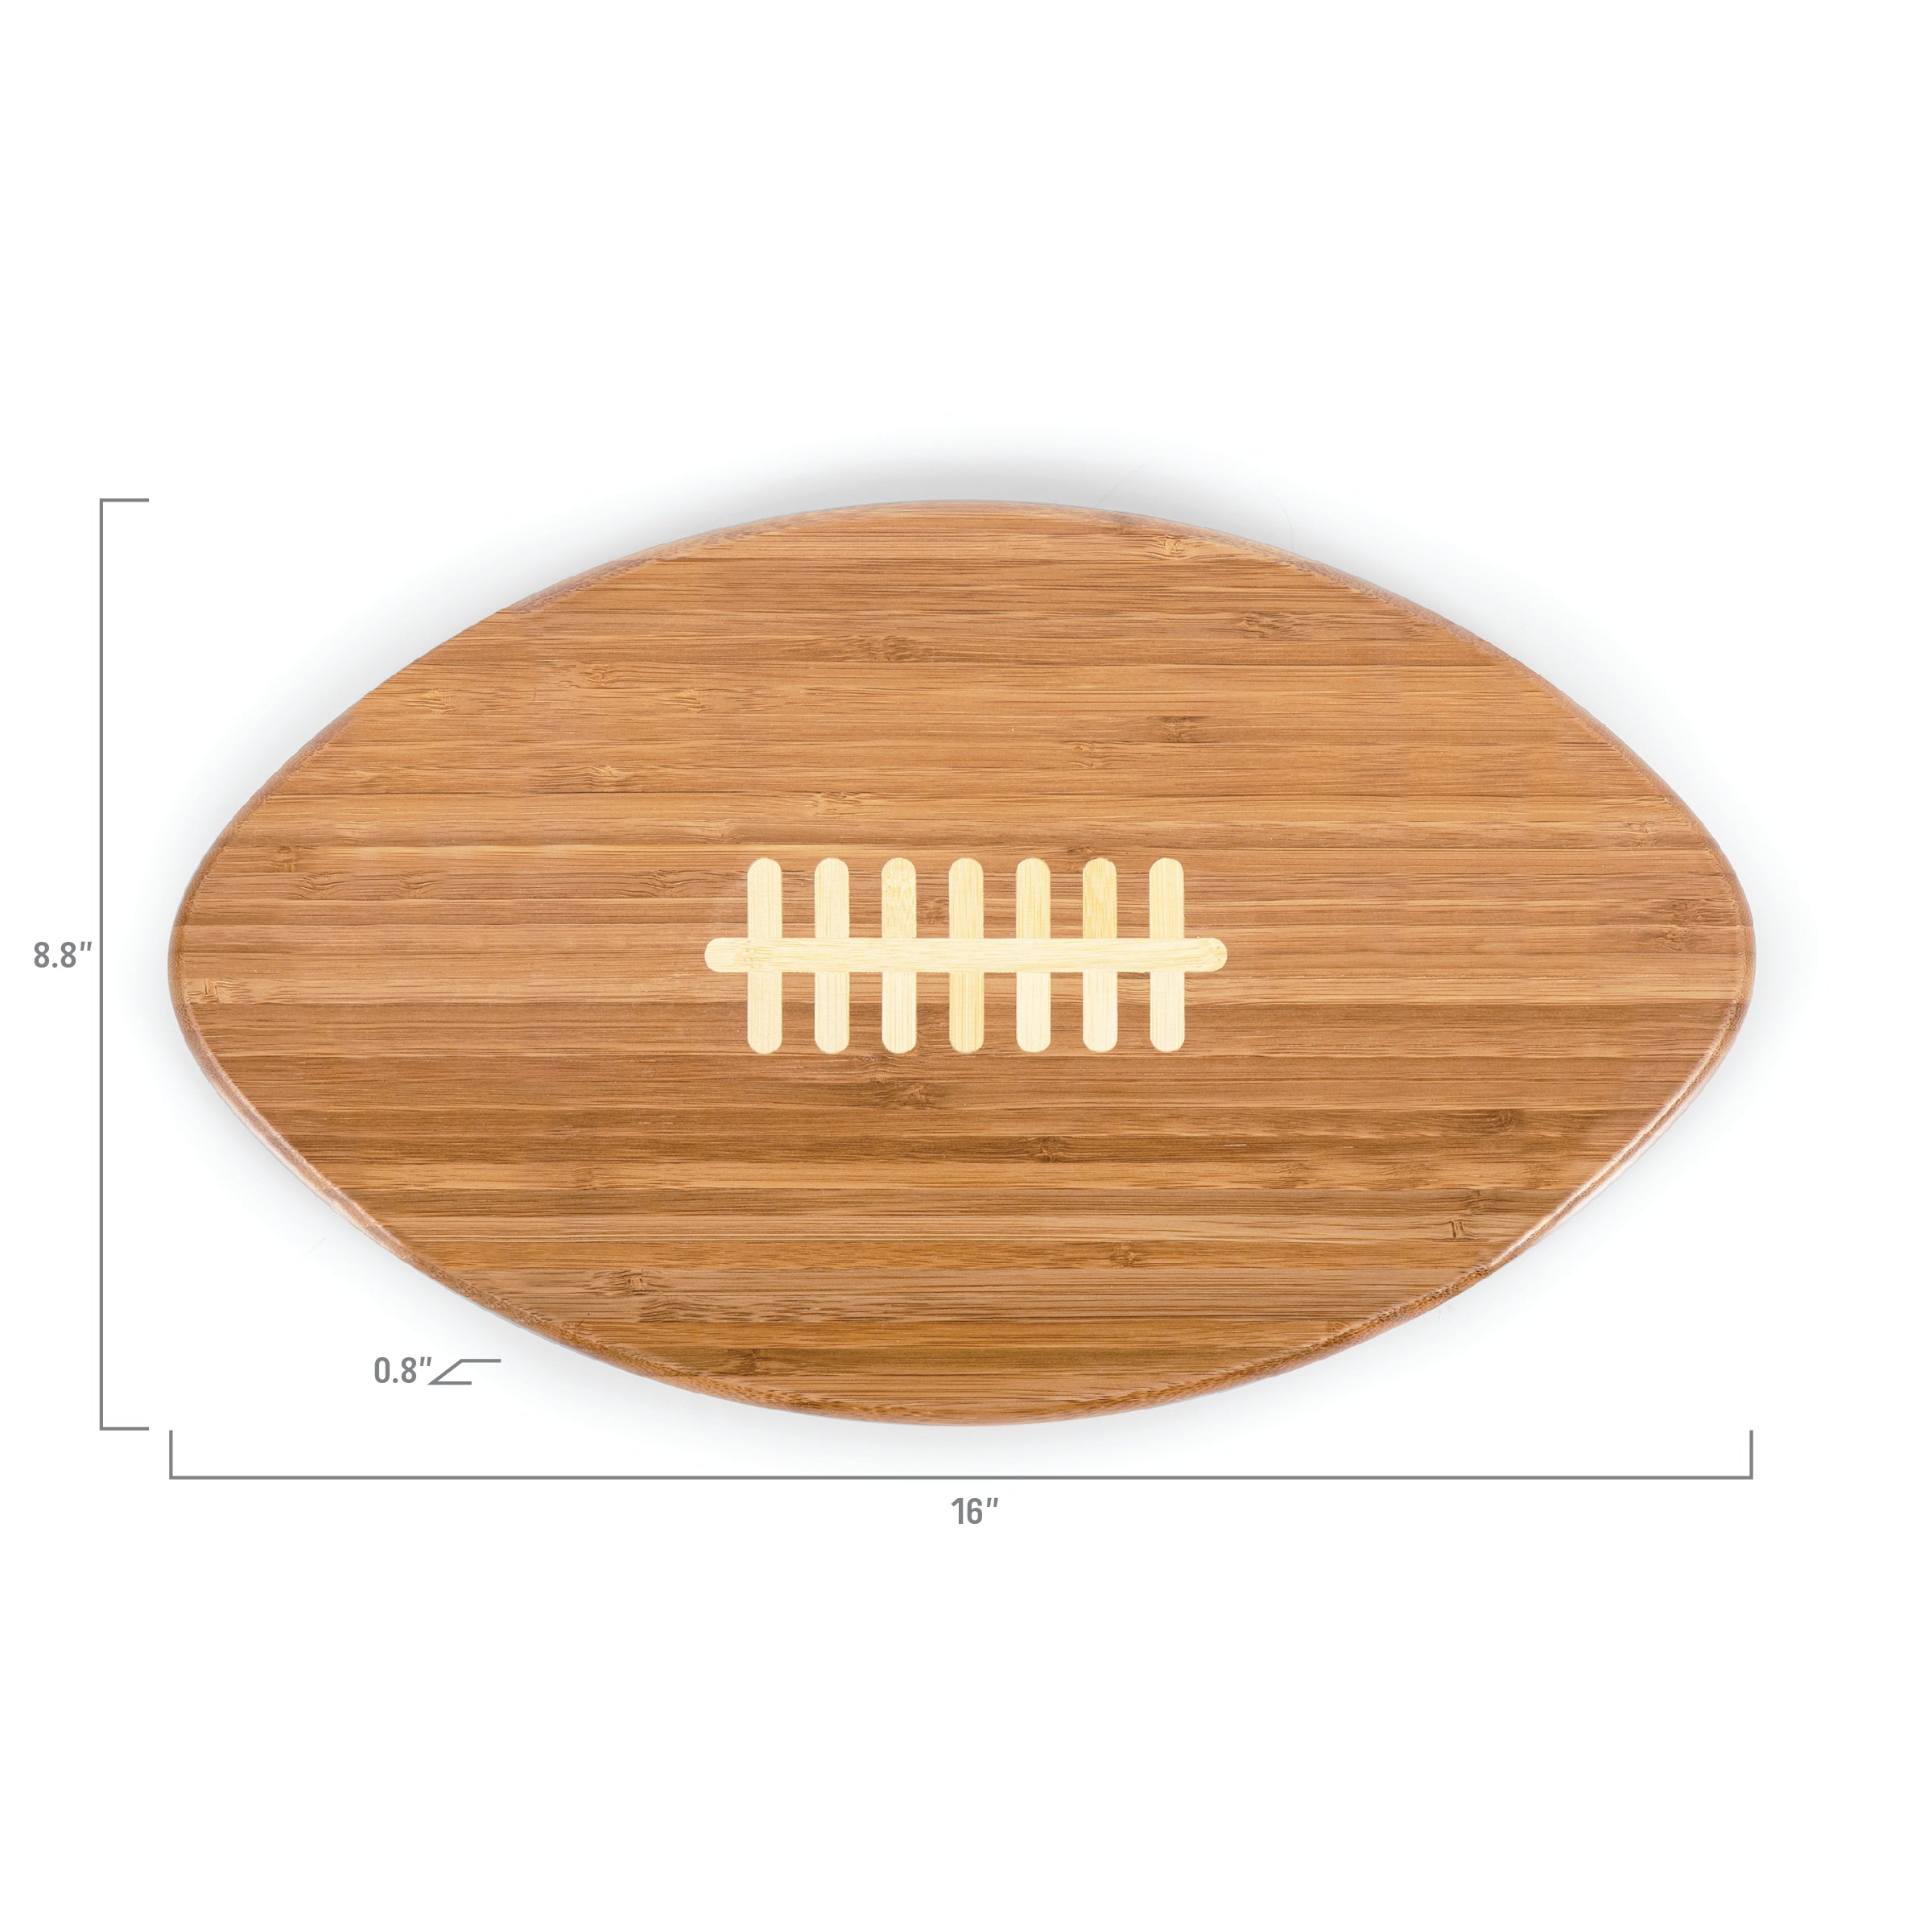 Arizona Cardinals Mickey Mouse - Touchdown! Football Cutting Board & Serving Tray